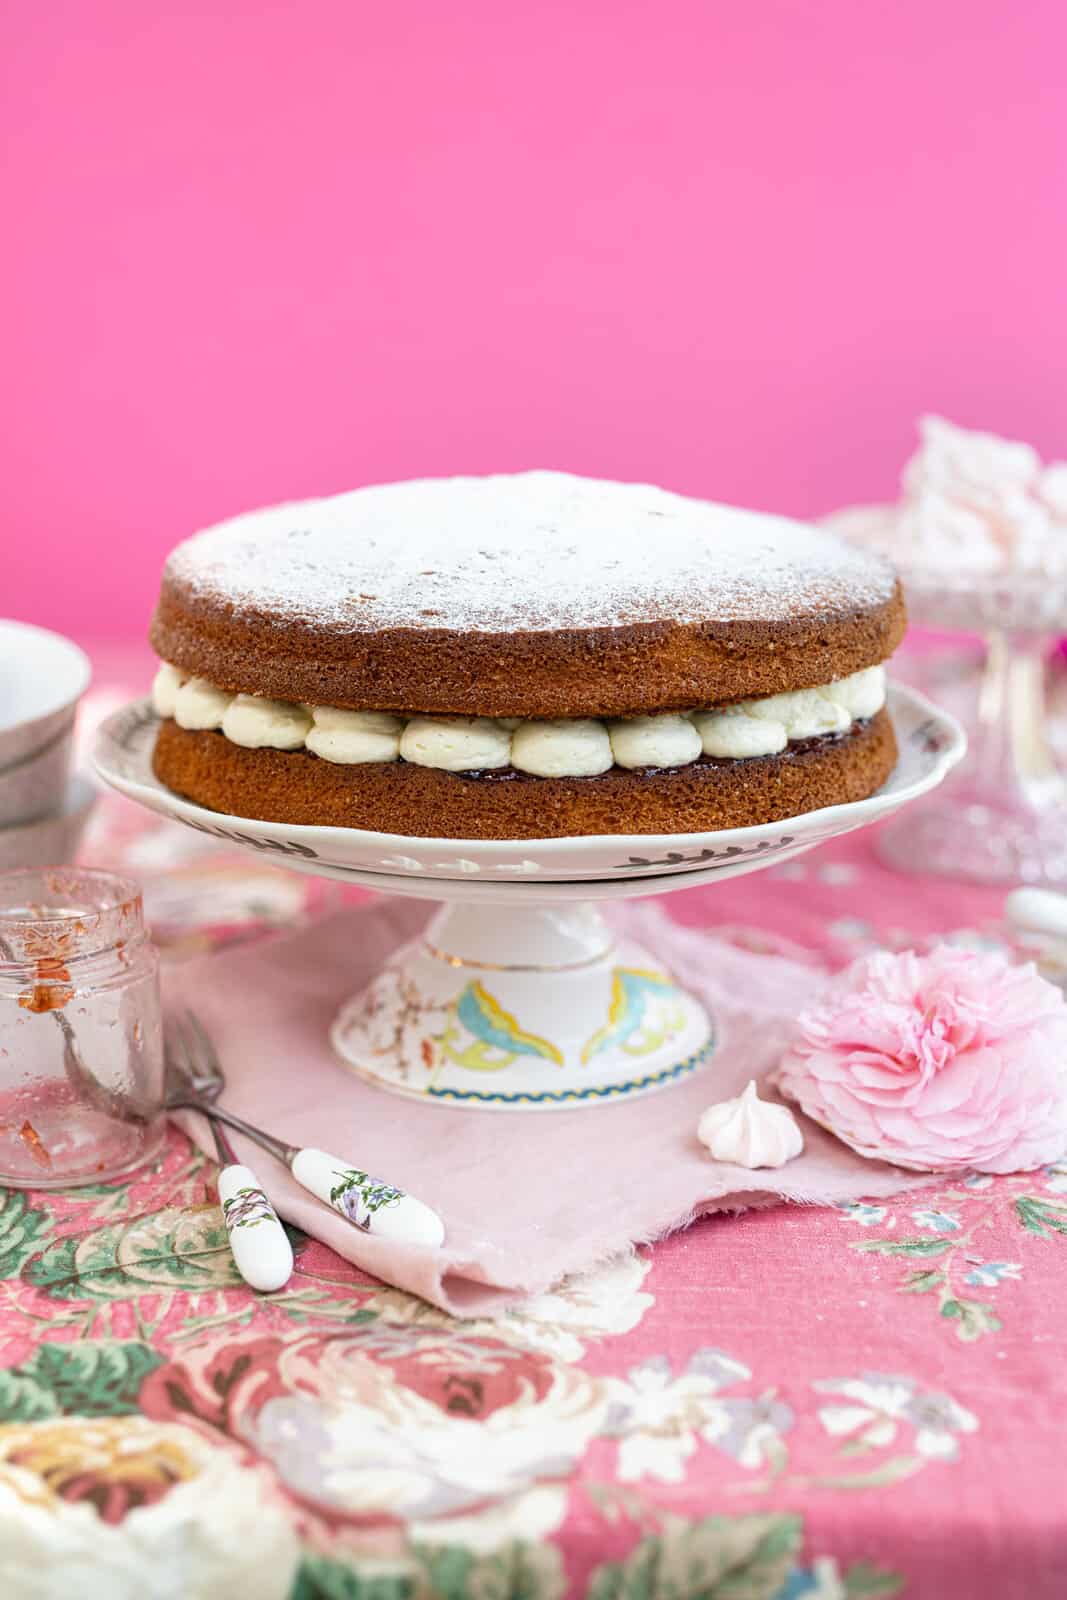 Classic Victoria sponge cake filled with jam and whipped cream on a cake stand